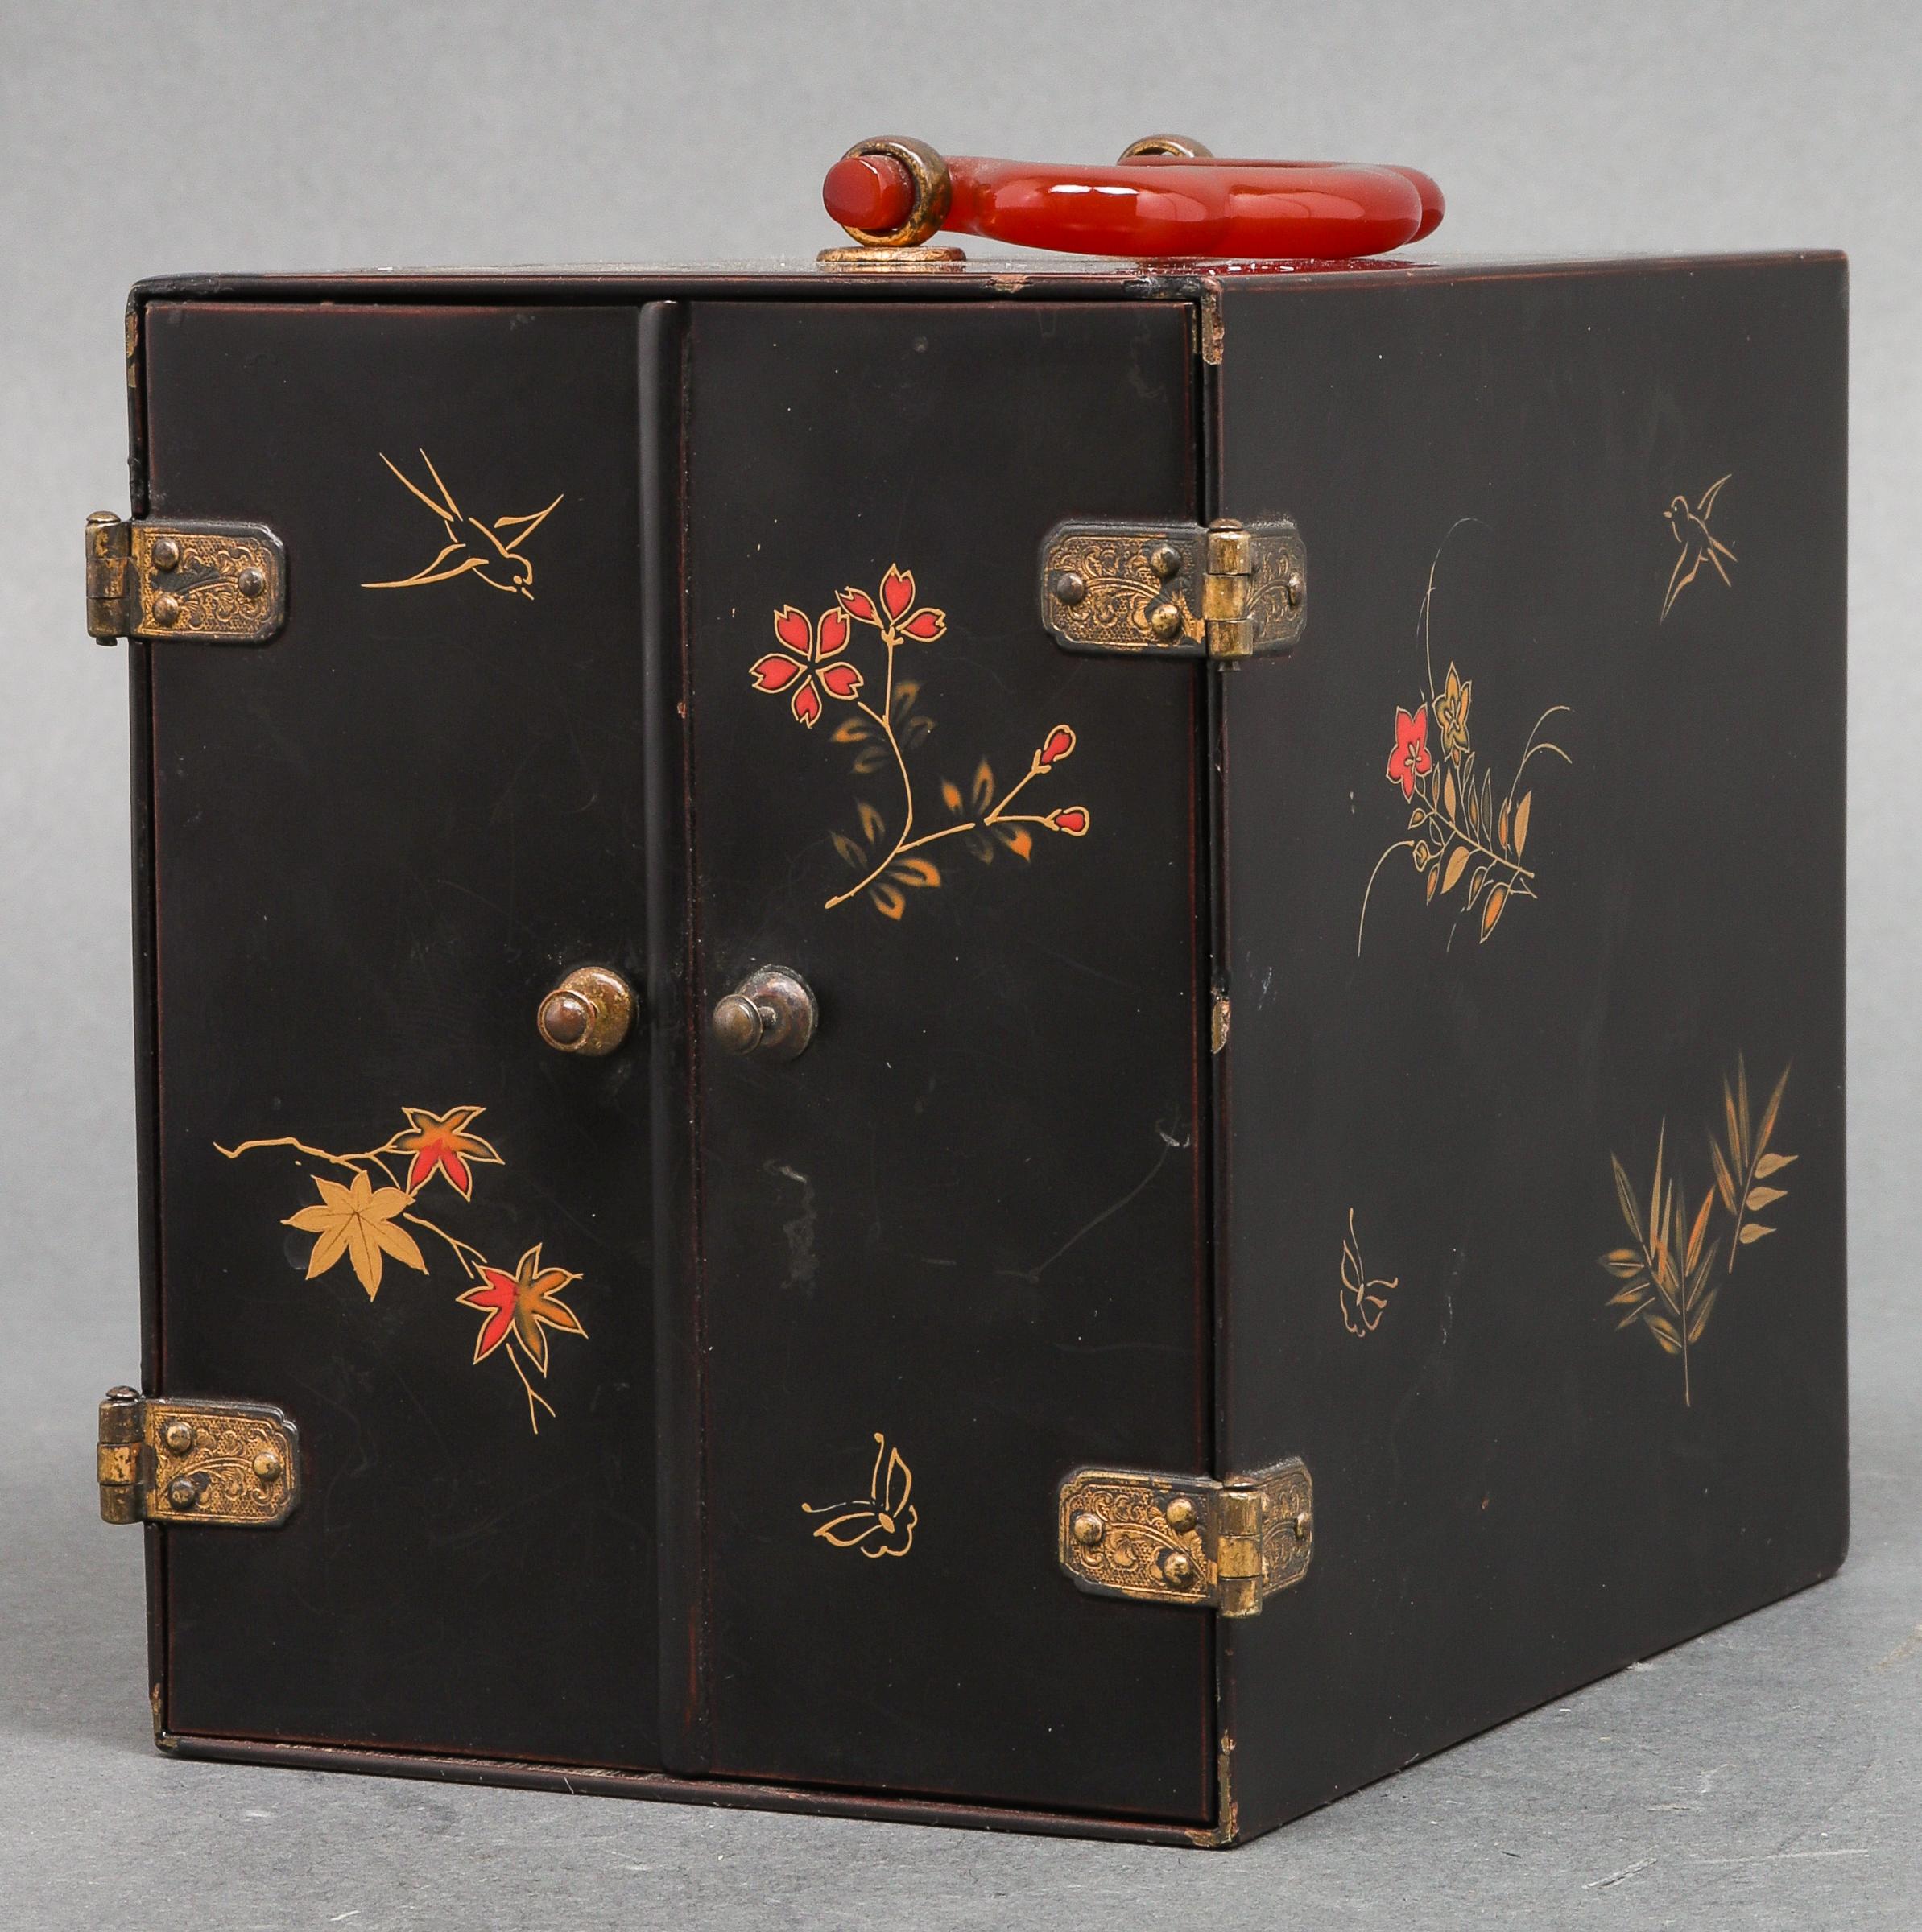 Japanese painted and lacquered wood jewelry cabinet form box, with brass mounted doors opening to reveal internal three-drawer chest, with a carnelian handle atop. Measures: 4.5